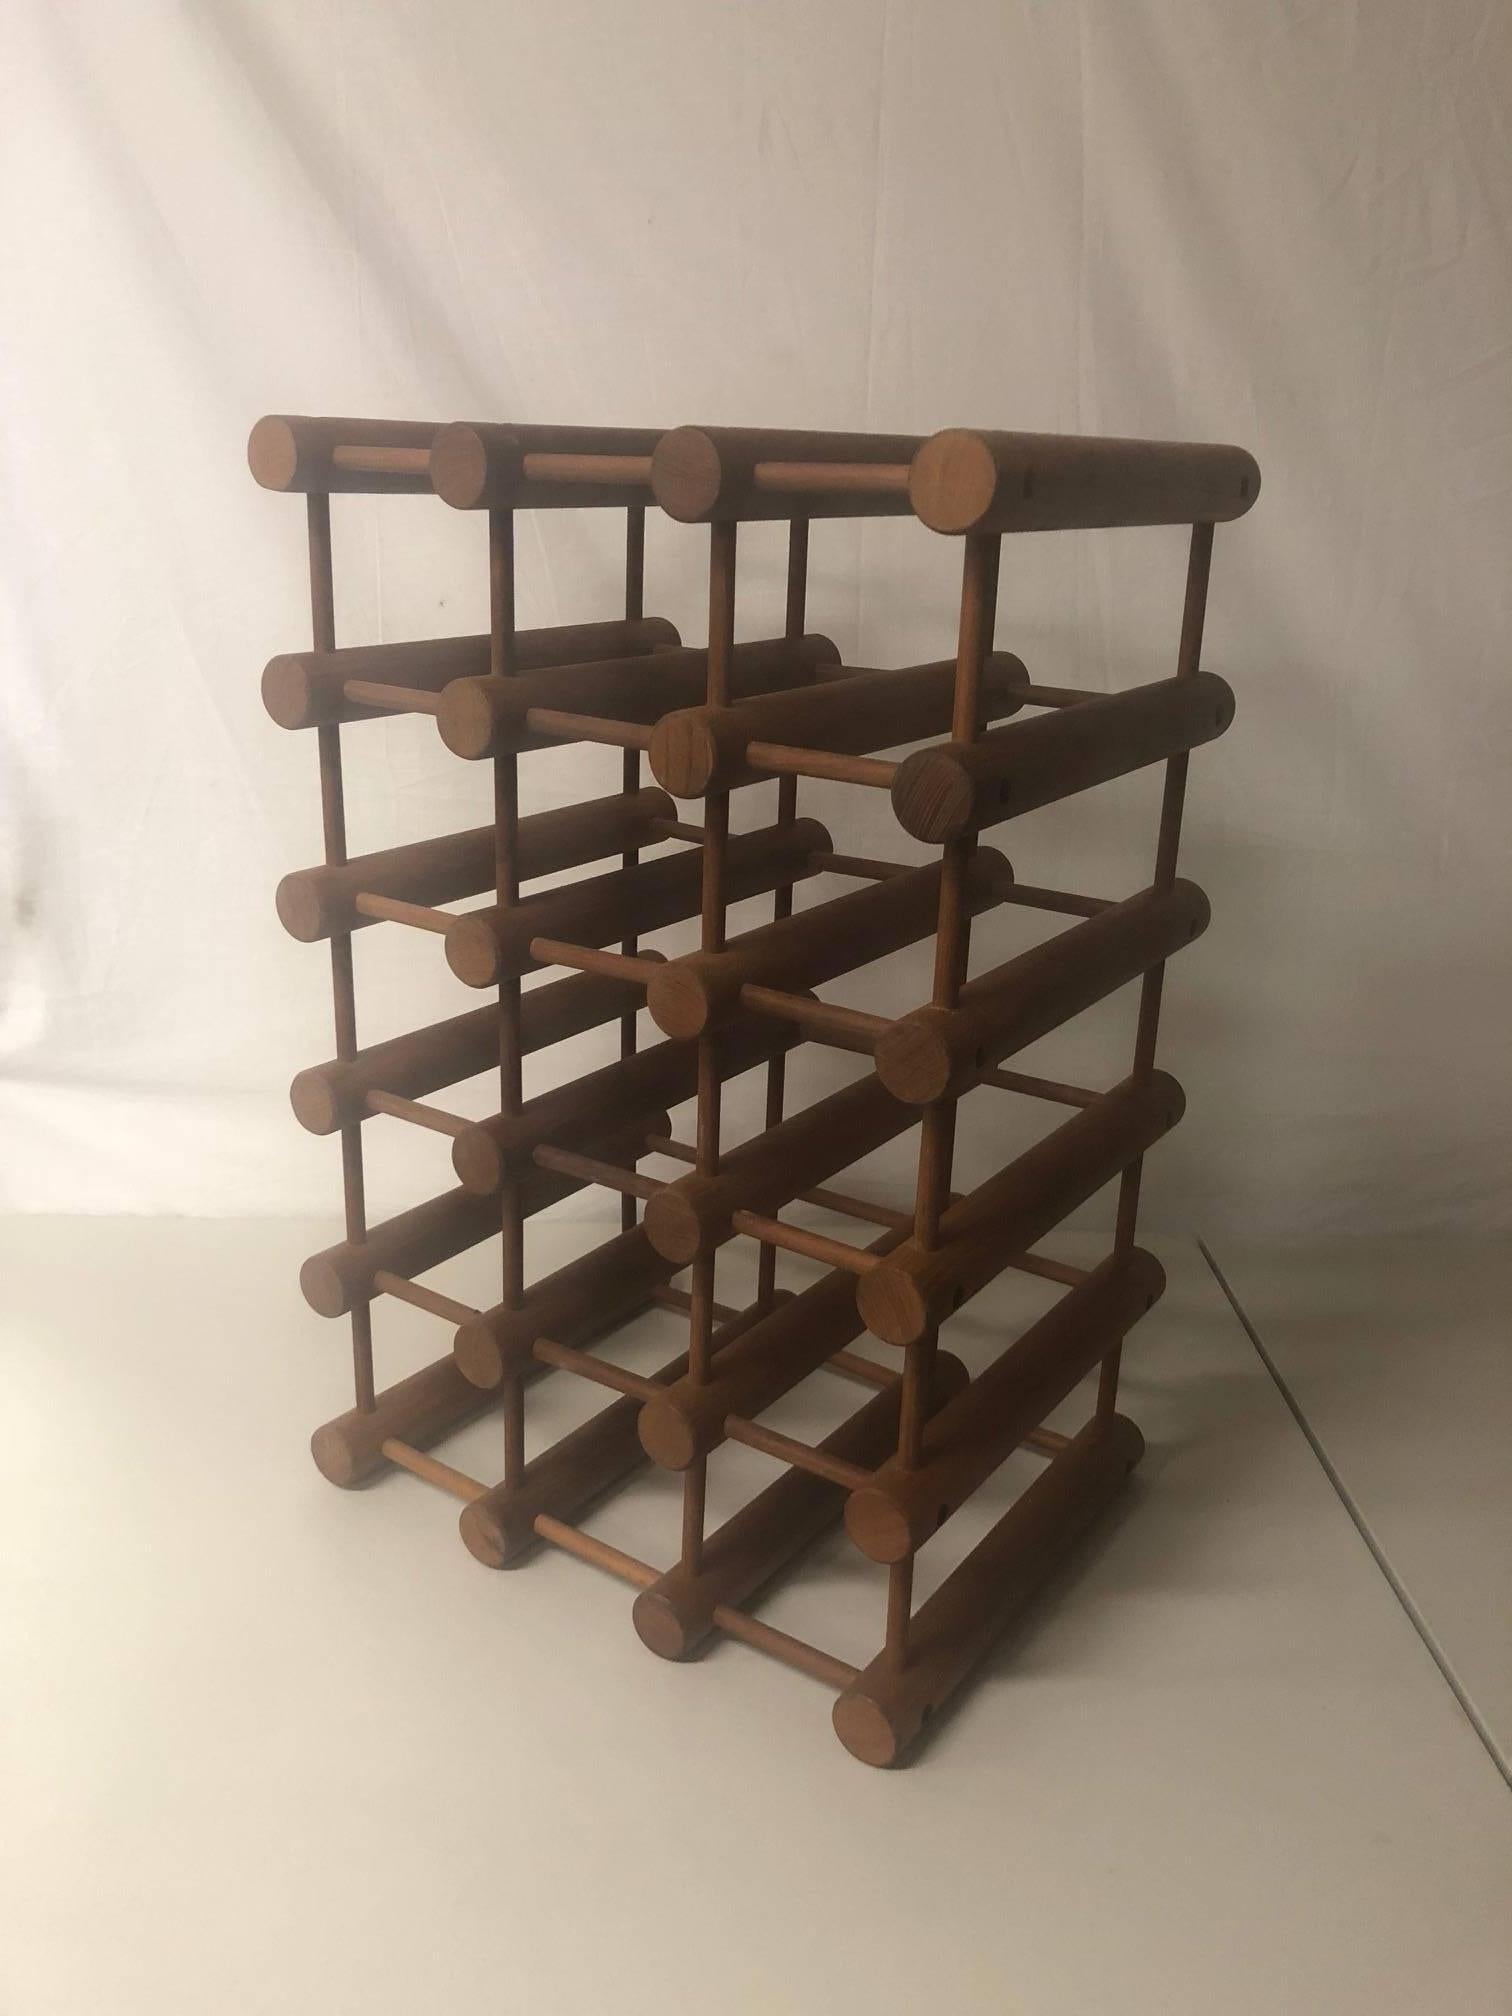 A very nice original Danish modern teak 15 bottle wine rack / holder signed by Nissen Langaa, circa 1960s. The piece is made of connecting teak dowels and is very heavy and solid and in very good vintage condition.